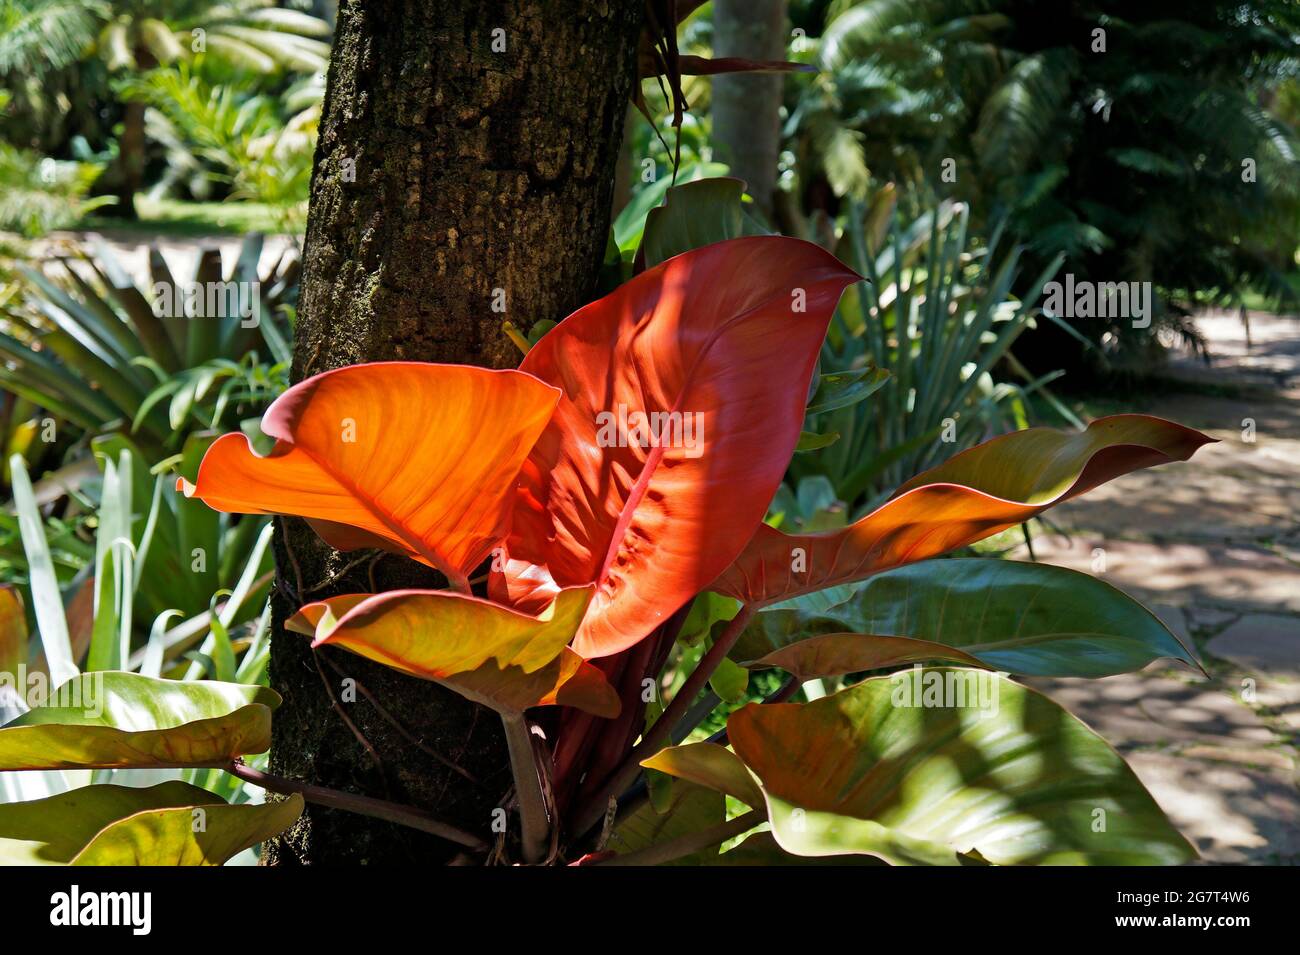 Red philodendron or Blushing philodendron (Philodendron erubescens), Minas Gerais, Brazil Stock Photo